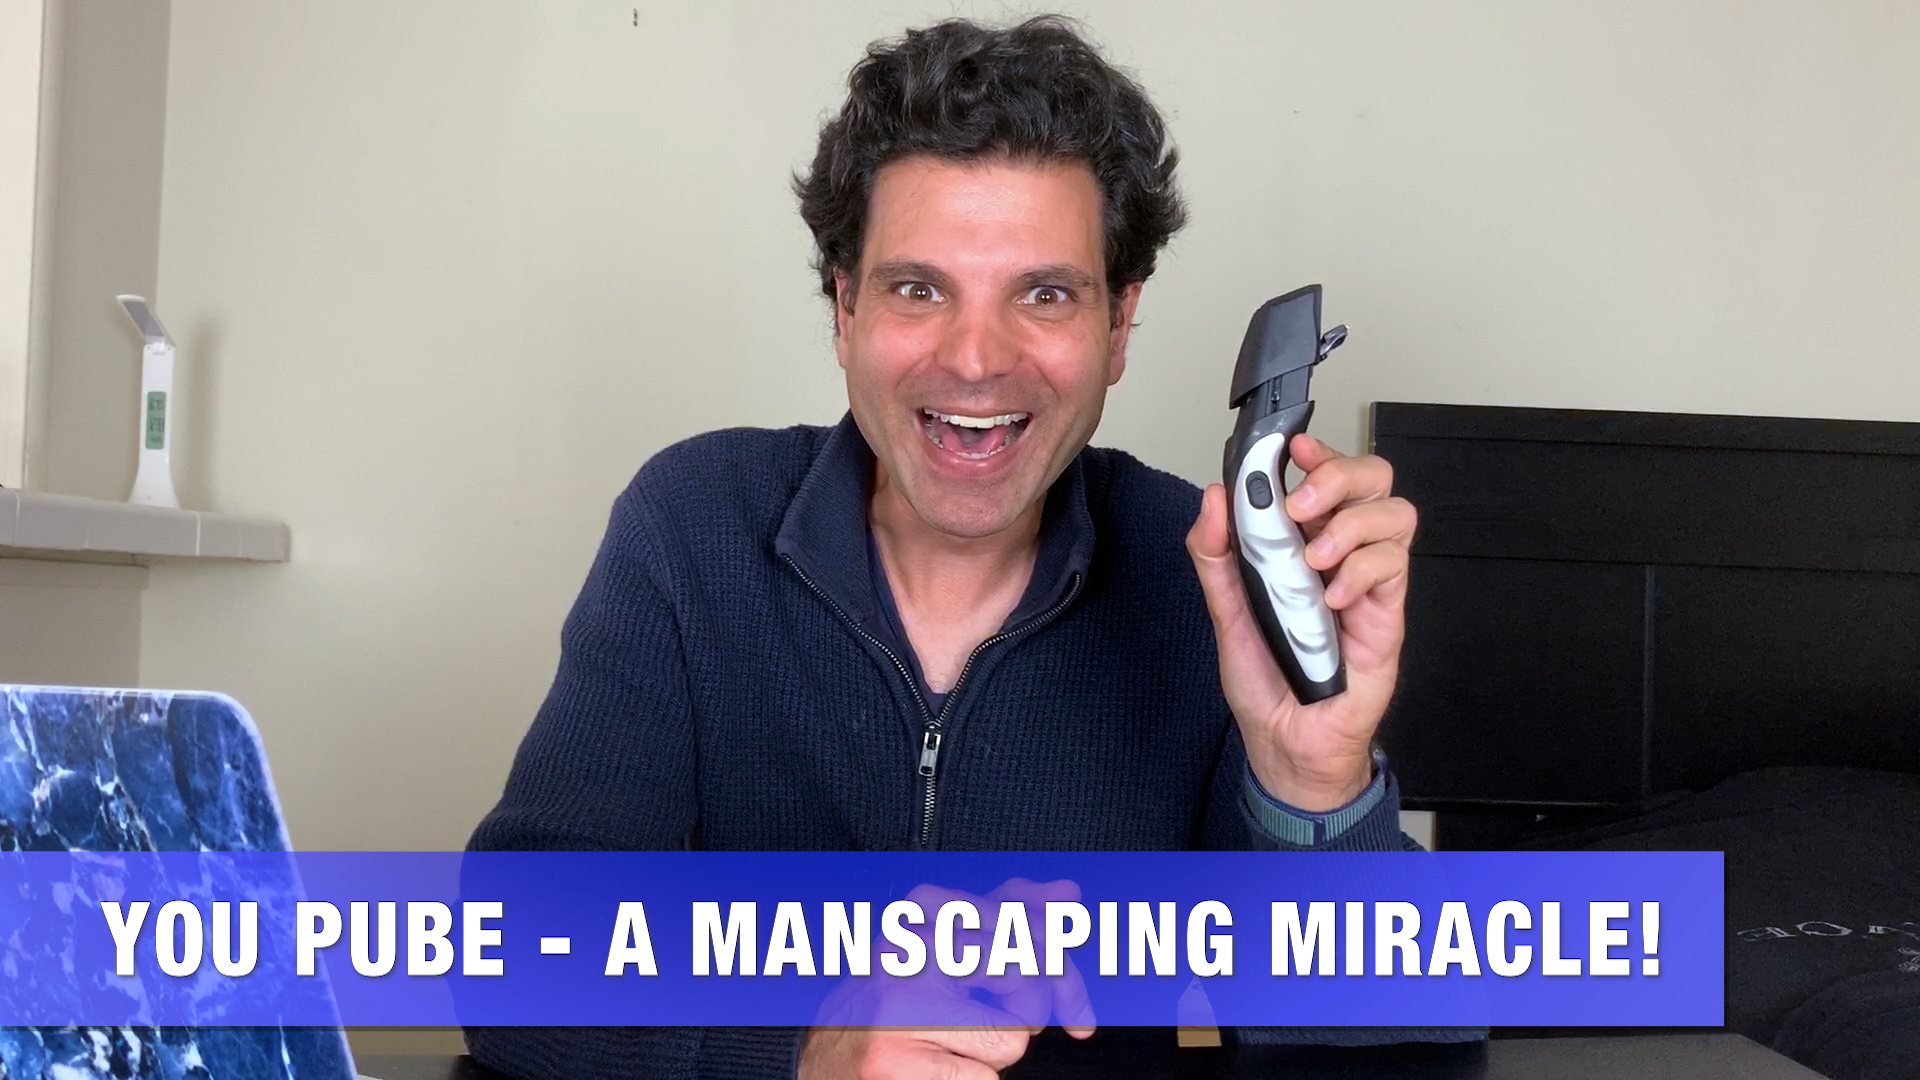 You Pube - A Manscaping Miracle!